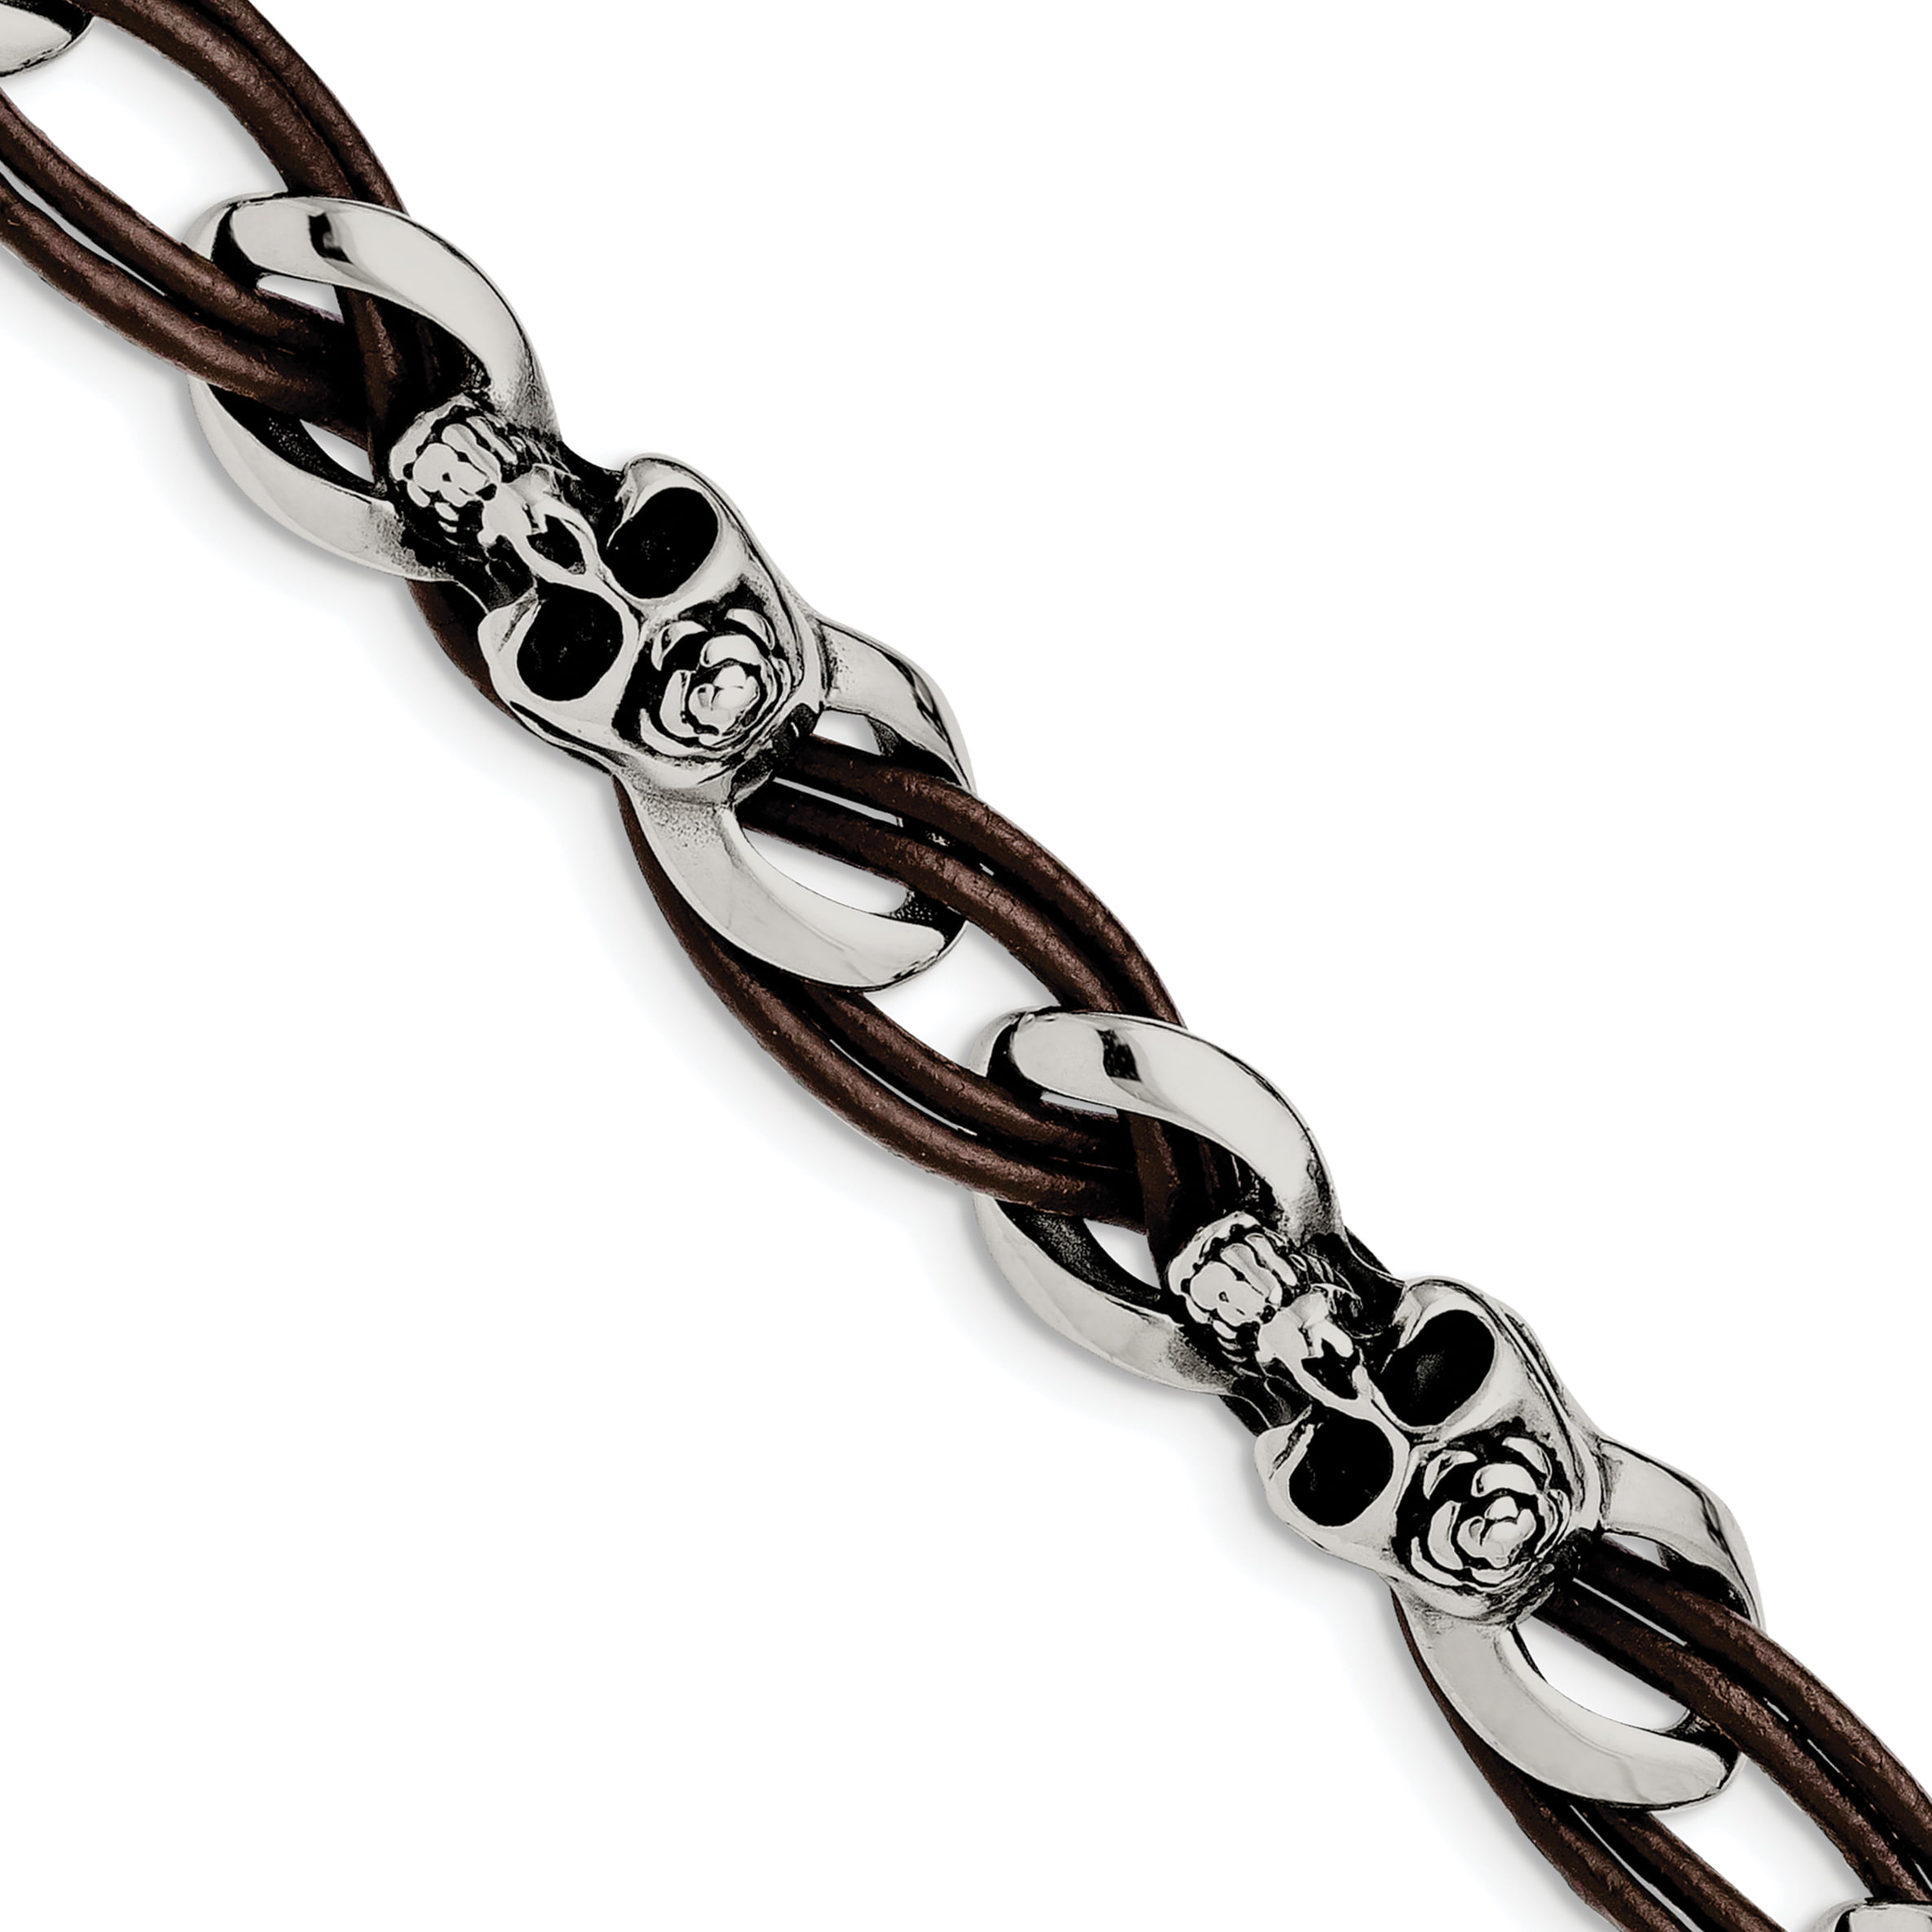 Stainless Steel Polished Skulls/Roses Leather Bracelet 8 Inches Long